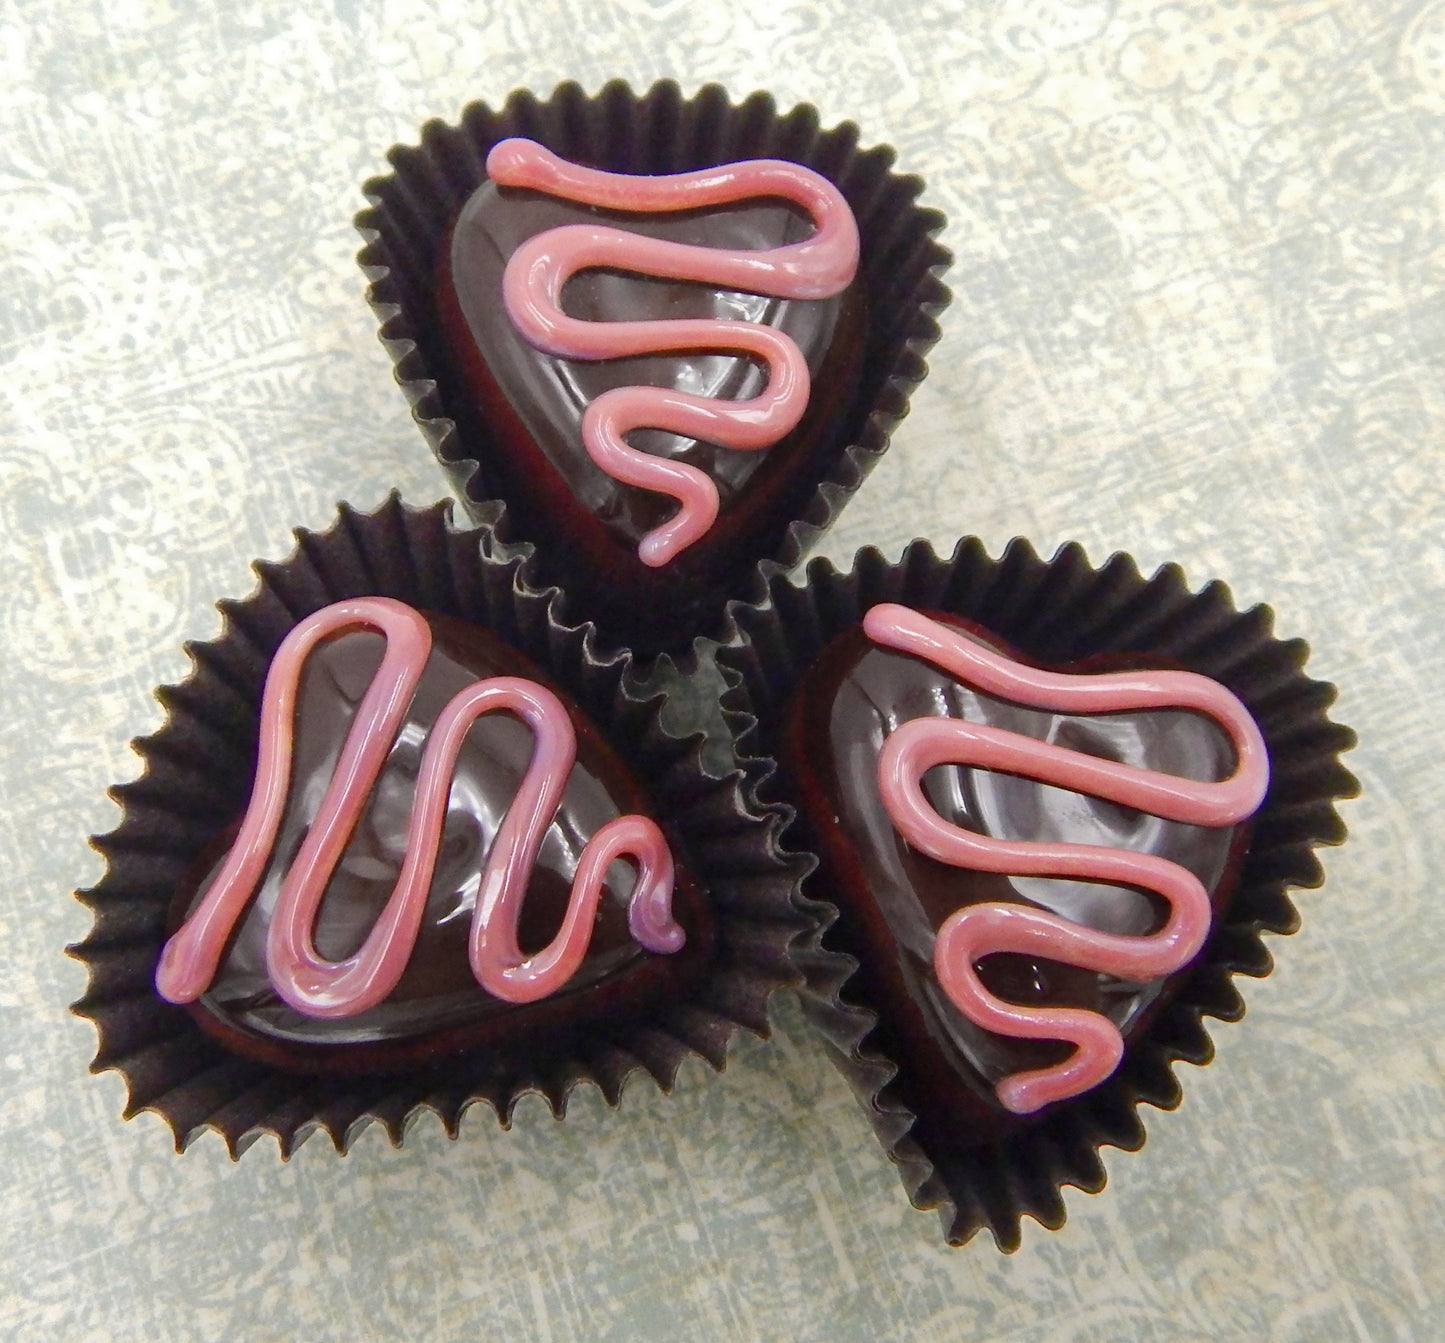 Heart-Shaped Chocolate Treats with Drizzles of Creamy Frosting - Assorted Colors (14-059+)